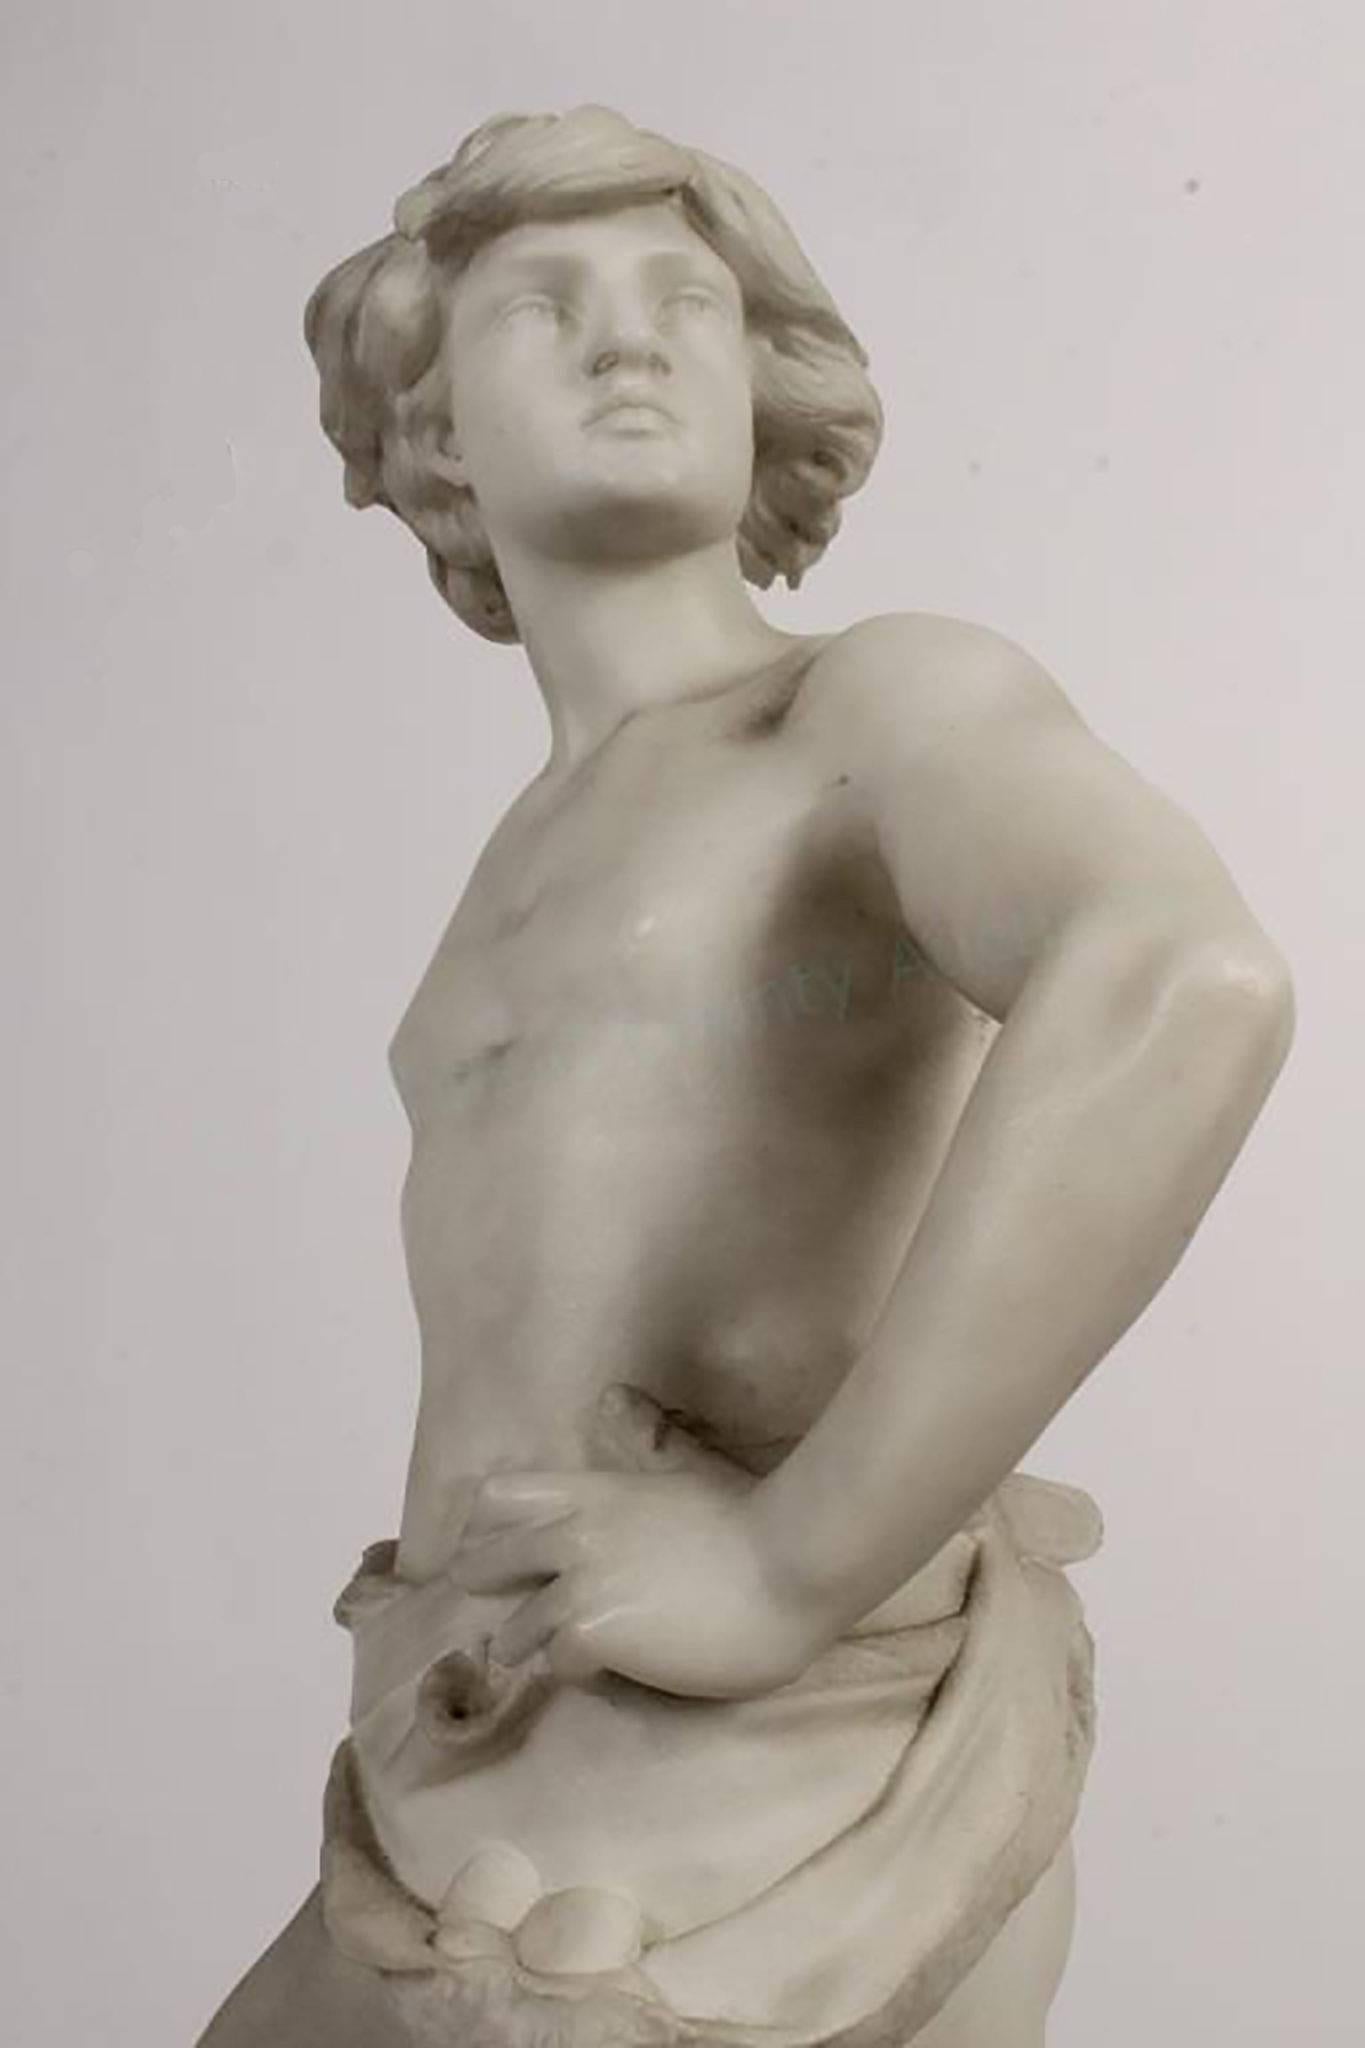 Large Marble Sculpture of Young David Collecting Stones - Gray Still-Life Sculpture by Unknown